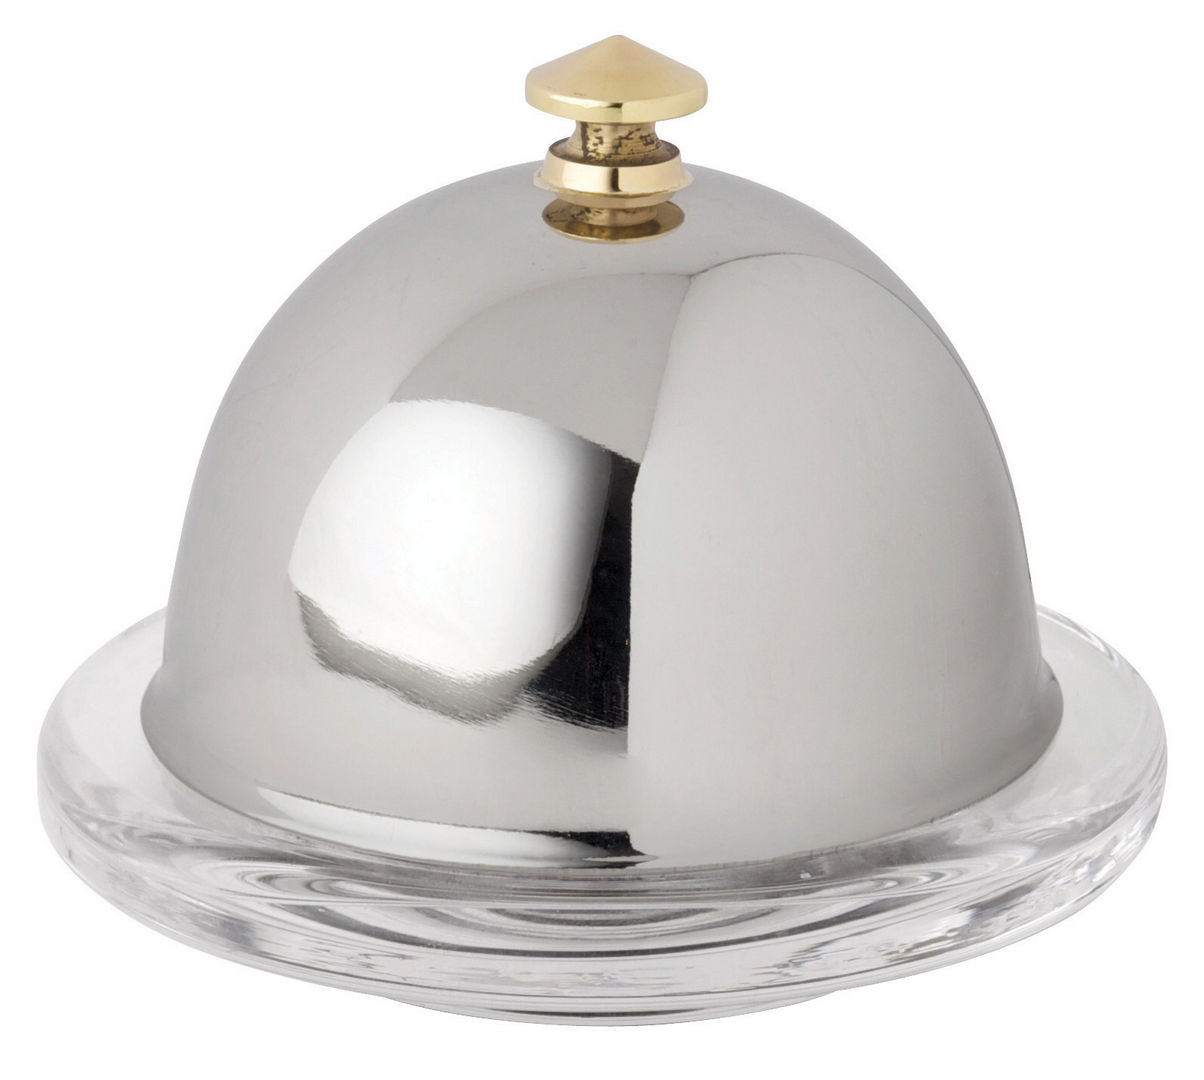 Stainless Dome for Butter Dish 3.5